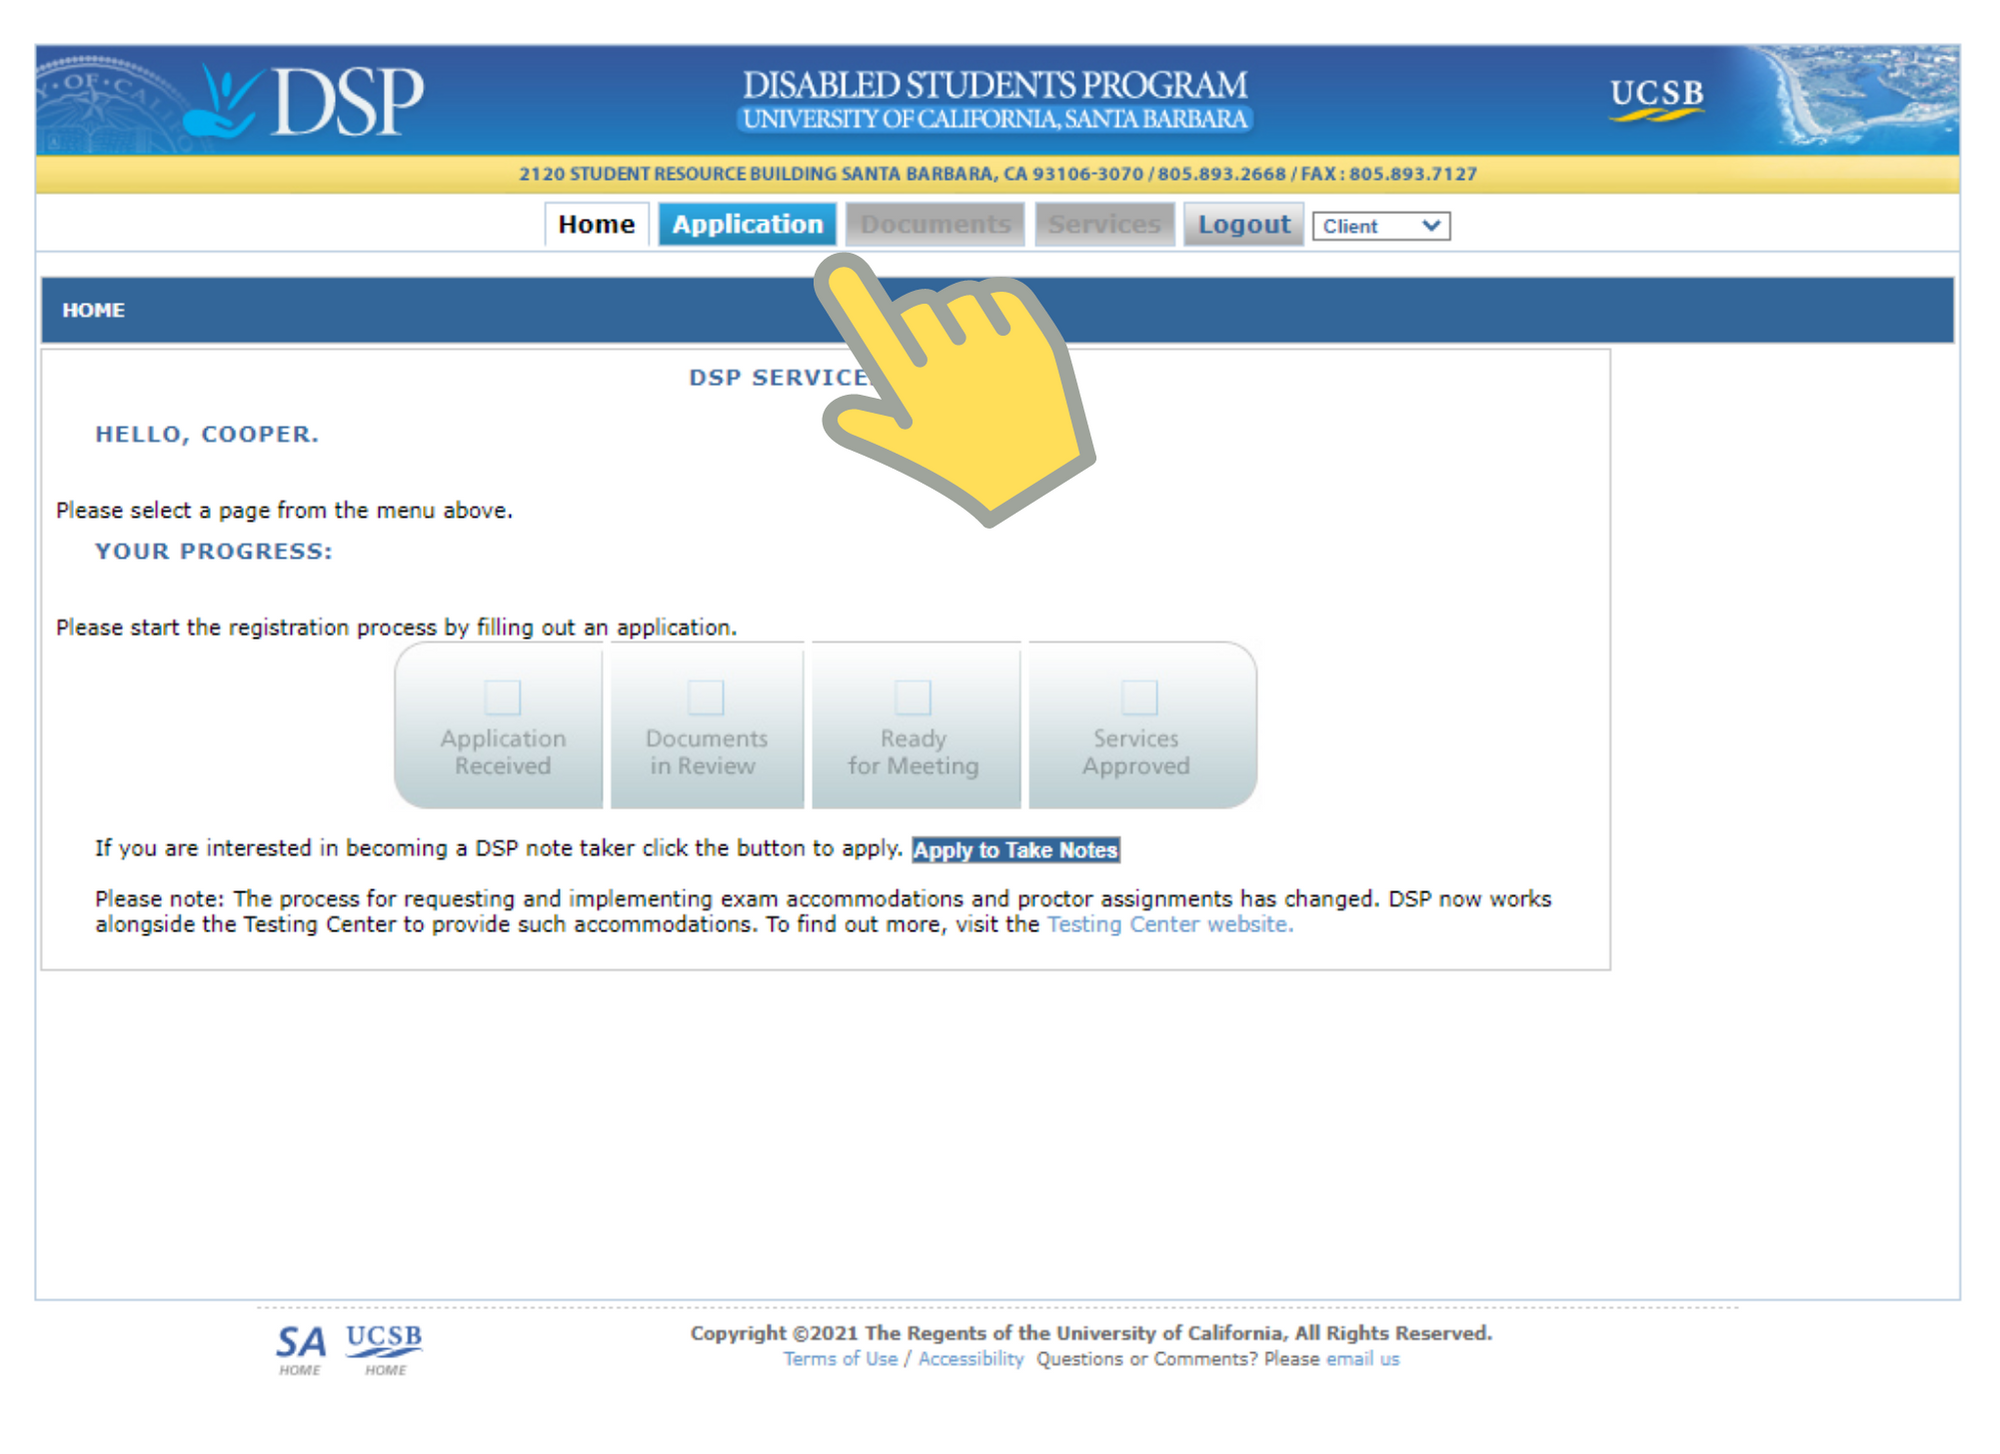 student-view-of-the-dsp-services-portal-disabled-students-program